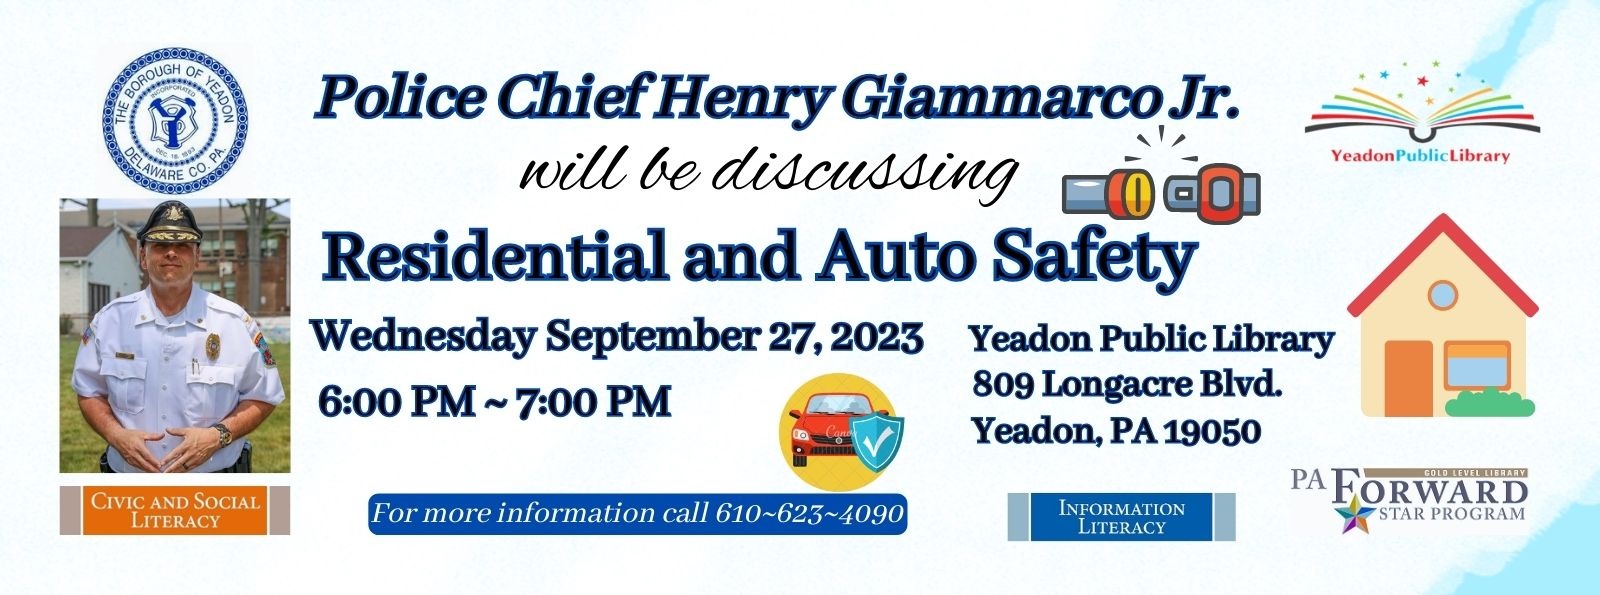 Police Chief Henry Residential & Auto Safety